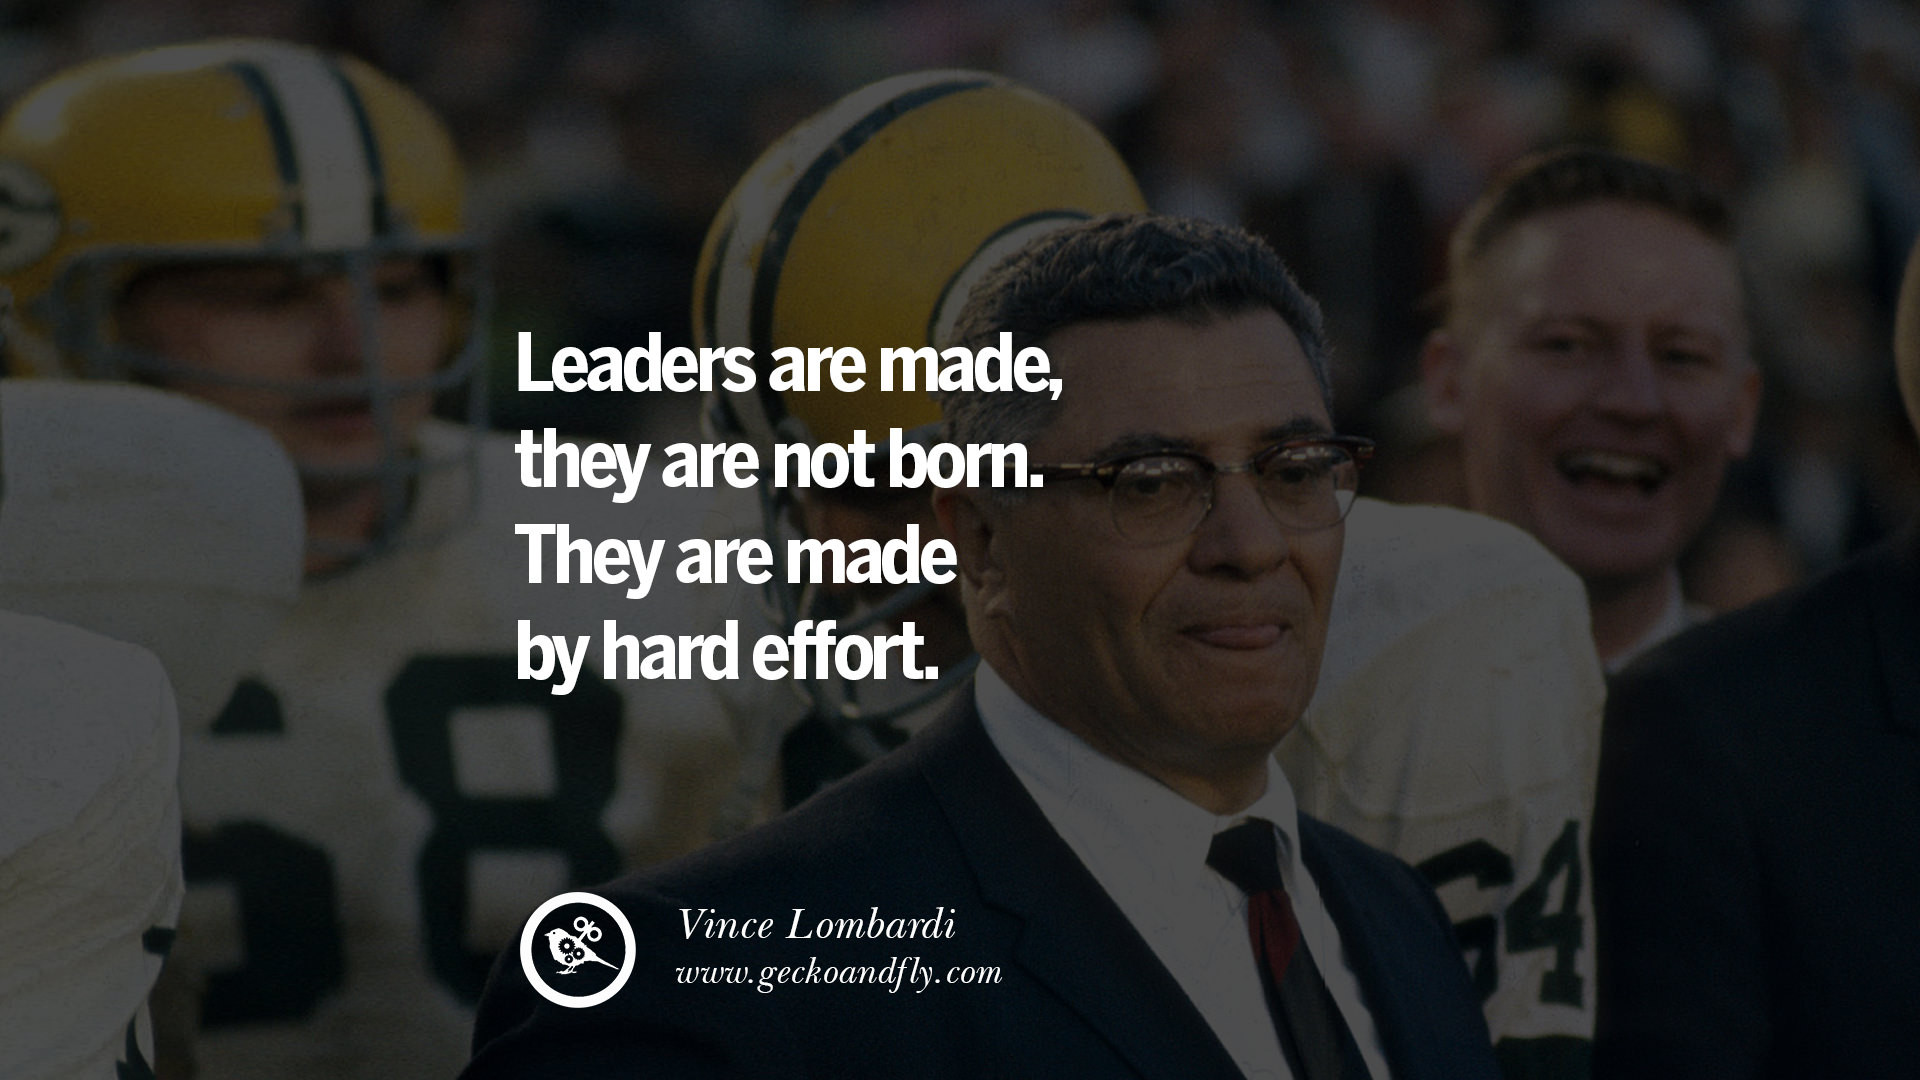 Vince Lombardi Leadership Quotes
 22 Uplifting and Motivational Quotes on Management Leadership